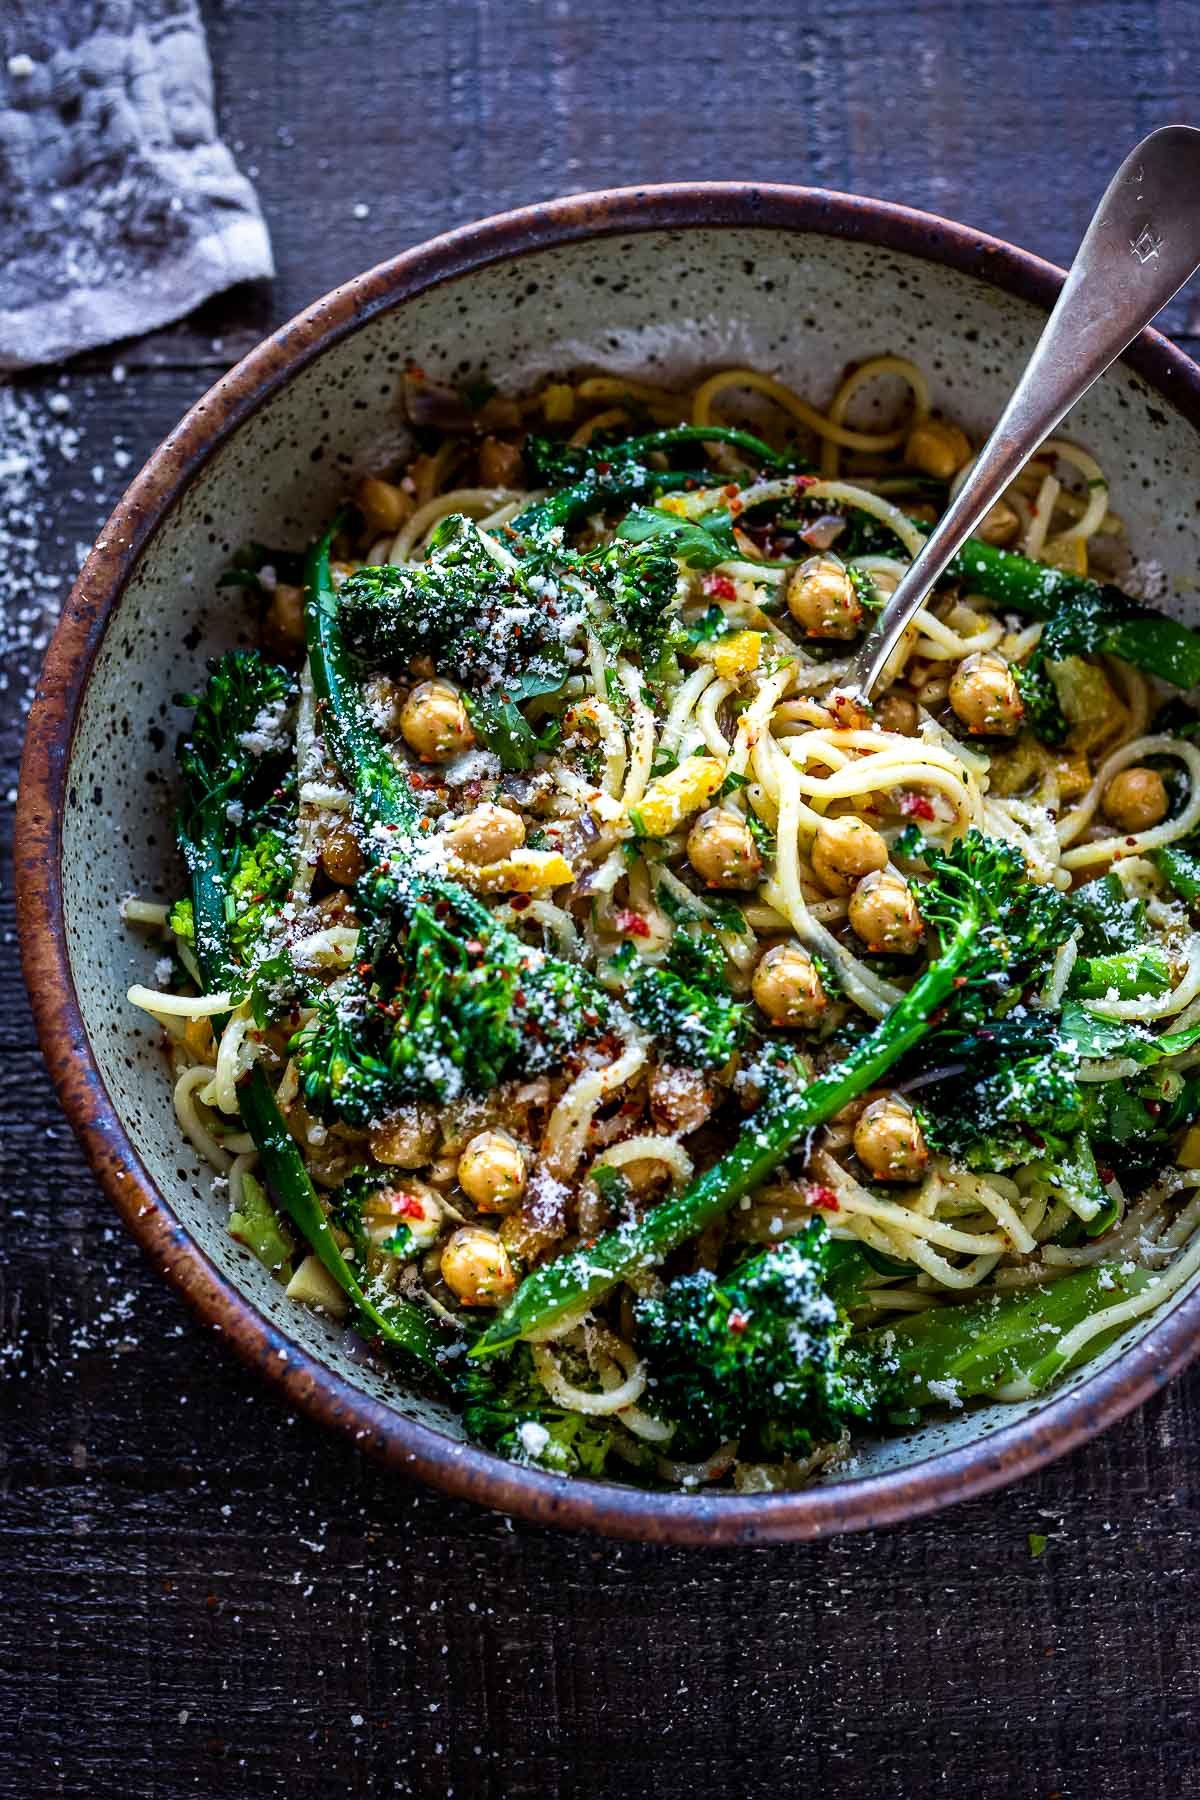 Pasta with Broccolini, Preserved Lemon and Chickpeas - punchy and bright and comes together quickly and easily - on the table in under 30 minutes!  A tasty healthy weeknight dinner! #spaghetti #broccolipasta #broccolini 